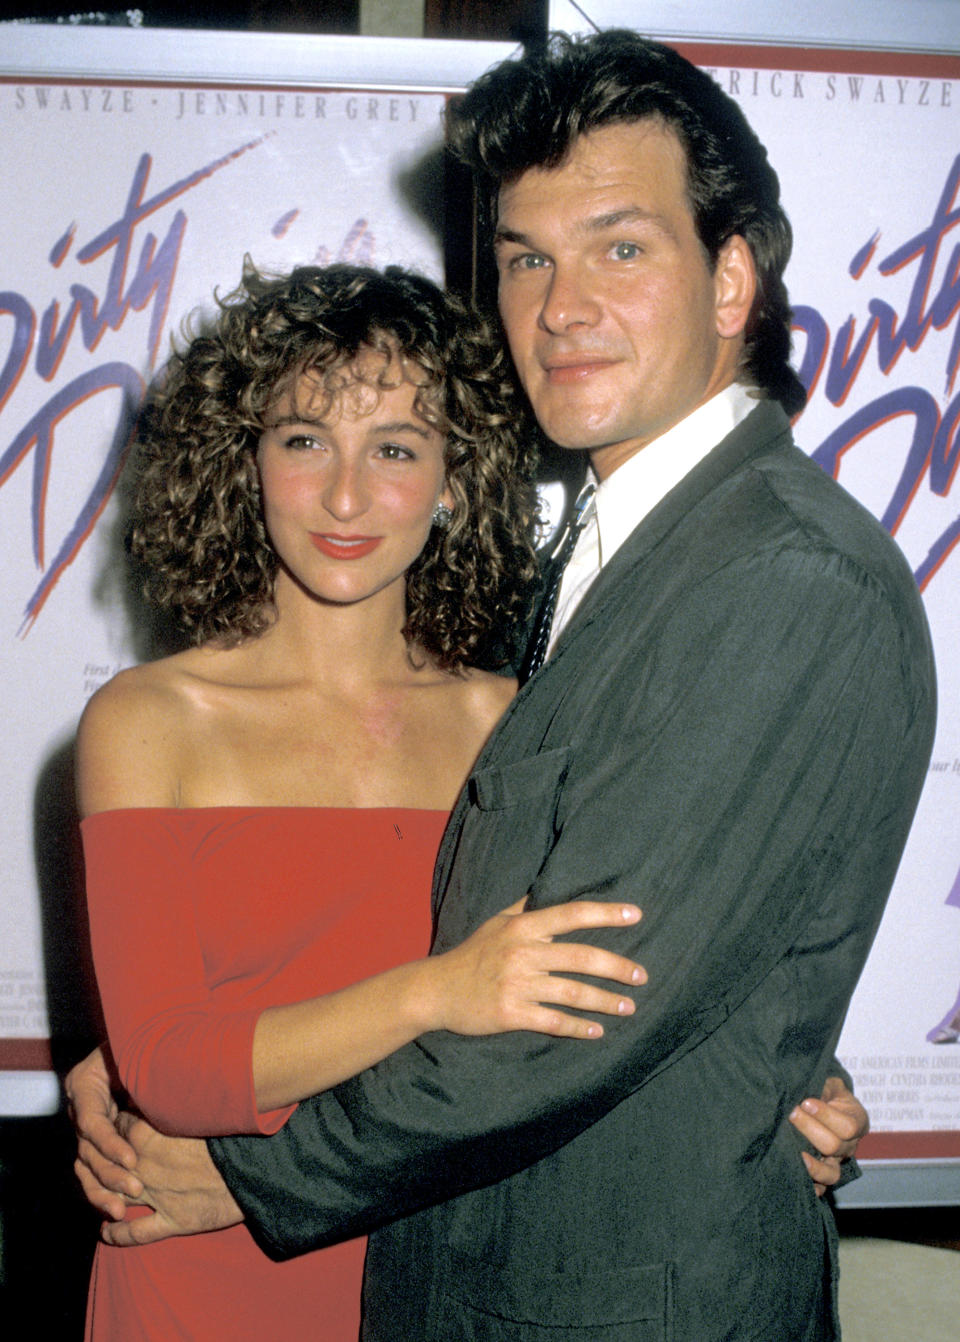 NEW YORK - AUGUST 17:  (FILE PHOTO) Actors Jennifer Grey and Patrick Swayze attend the premiere of &#39;Dirty Dancing&#39; at the Gemini Theater on August 17, 1987 in New York City.  (Photo by Jim Smeal/WireImage)